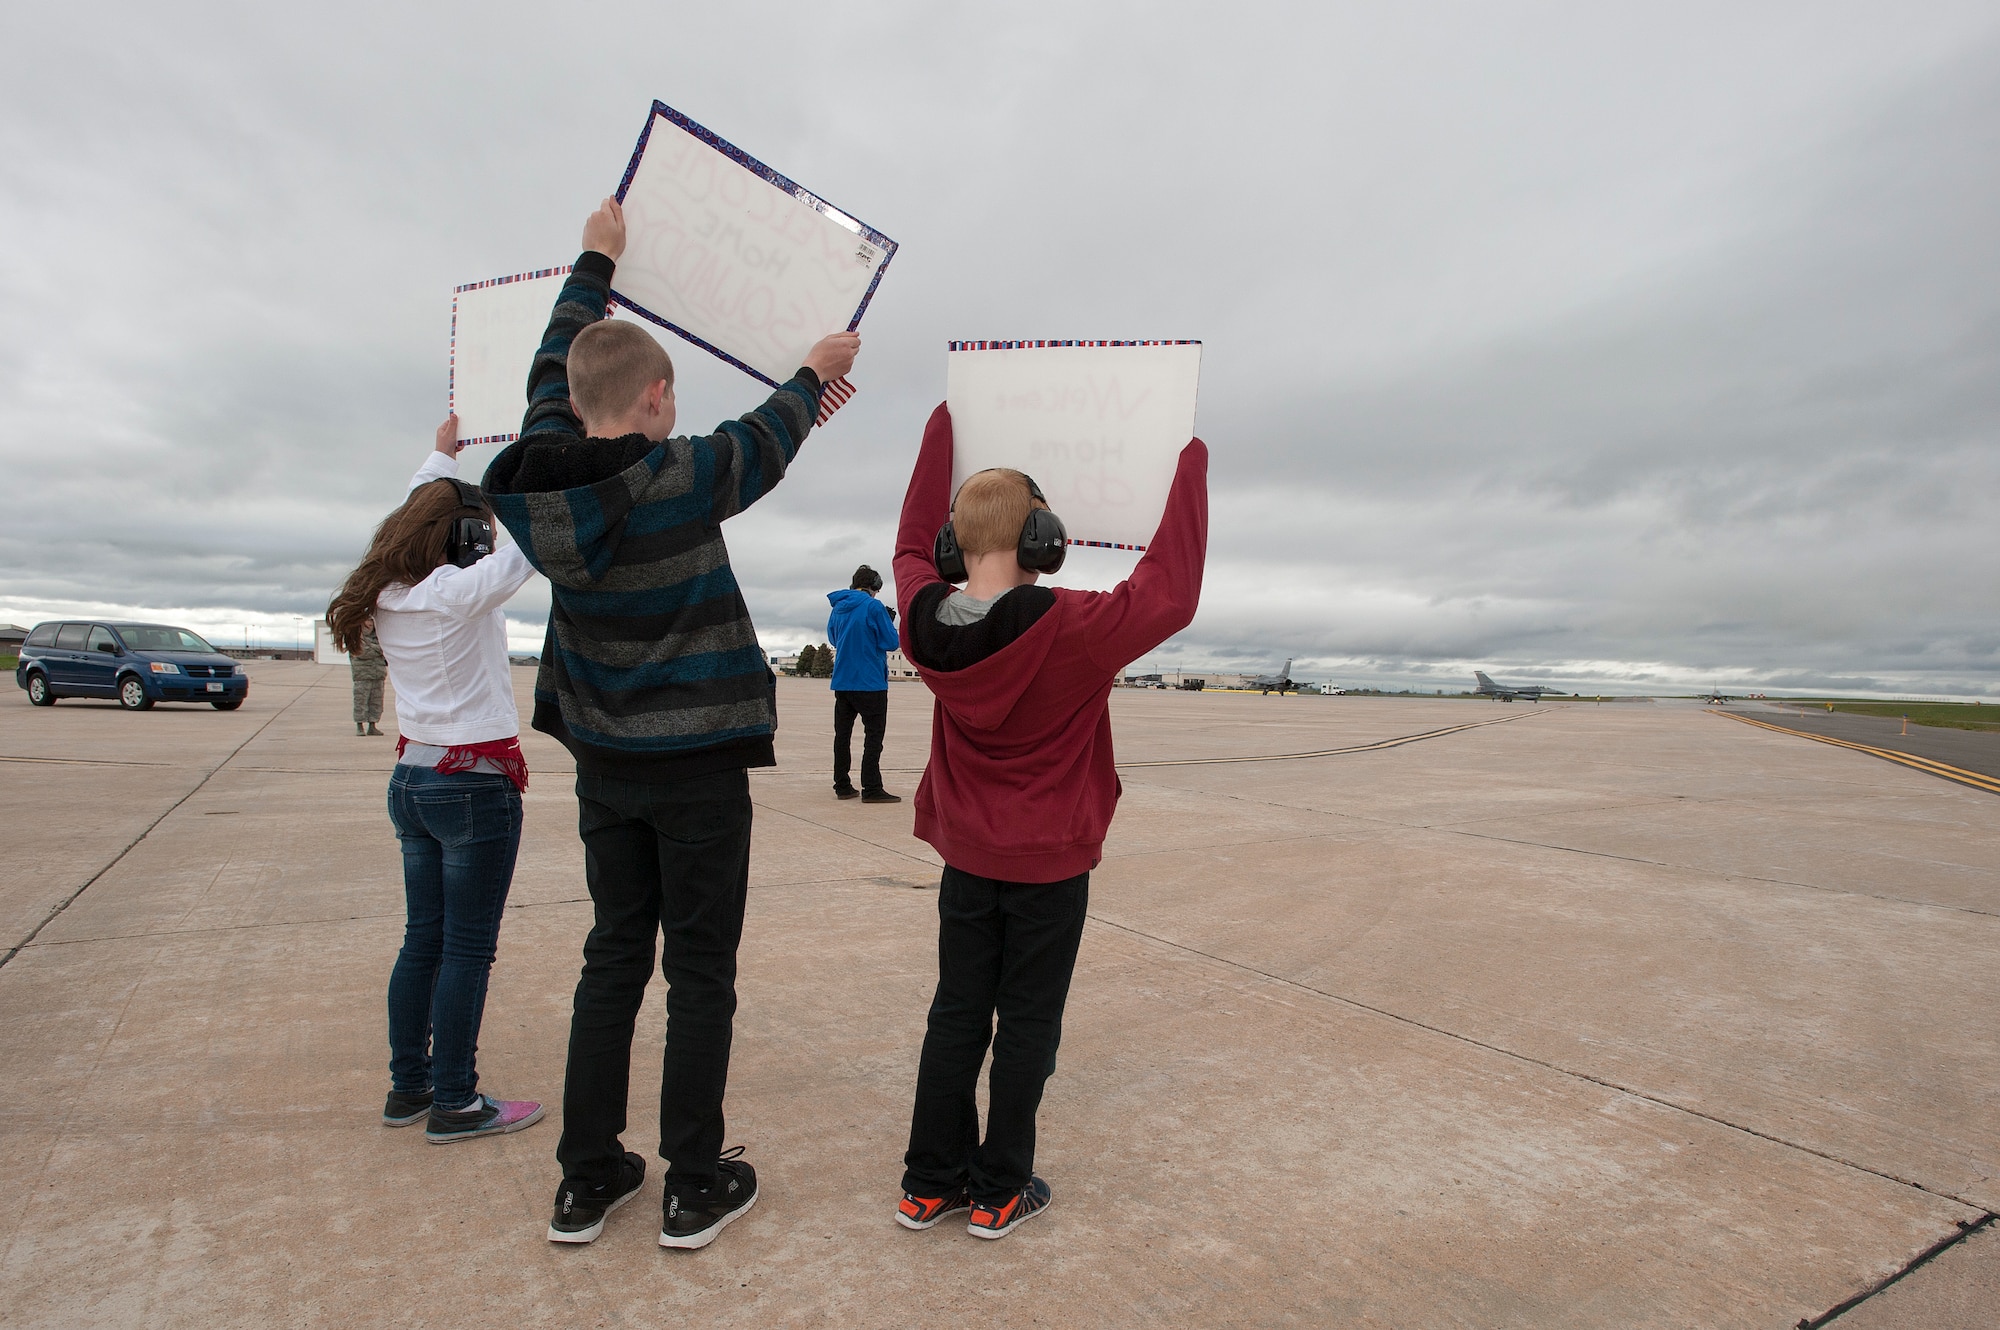 U.S. Air Force Lt. Col. Kurt Tongren???s kids hold up welcome home signs as he taxis in an F-16 Fighting Falcon from the 120th Fighter Squadron, Colorado Air National Guard, at Buckley Air Force Base, Colo., after a deployment to the Republic of Korea, May 19, 2015. Integrating with other U.S. Air Force members, flying daily training mission and providing a Theater Security Package for the past 90 days, this return home marks the completion of the seventh deployment for the "Redeyes" of the 120th FS along with the 140th Wing since Sept. 11, 2001. (U.S. Air National Guard photo by: Tech. Sgt. Wolfram M. Stumpf/RELEASED)